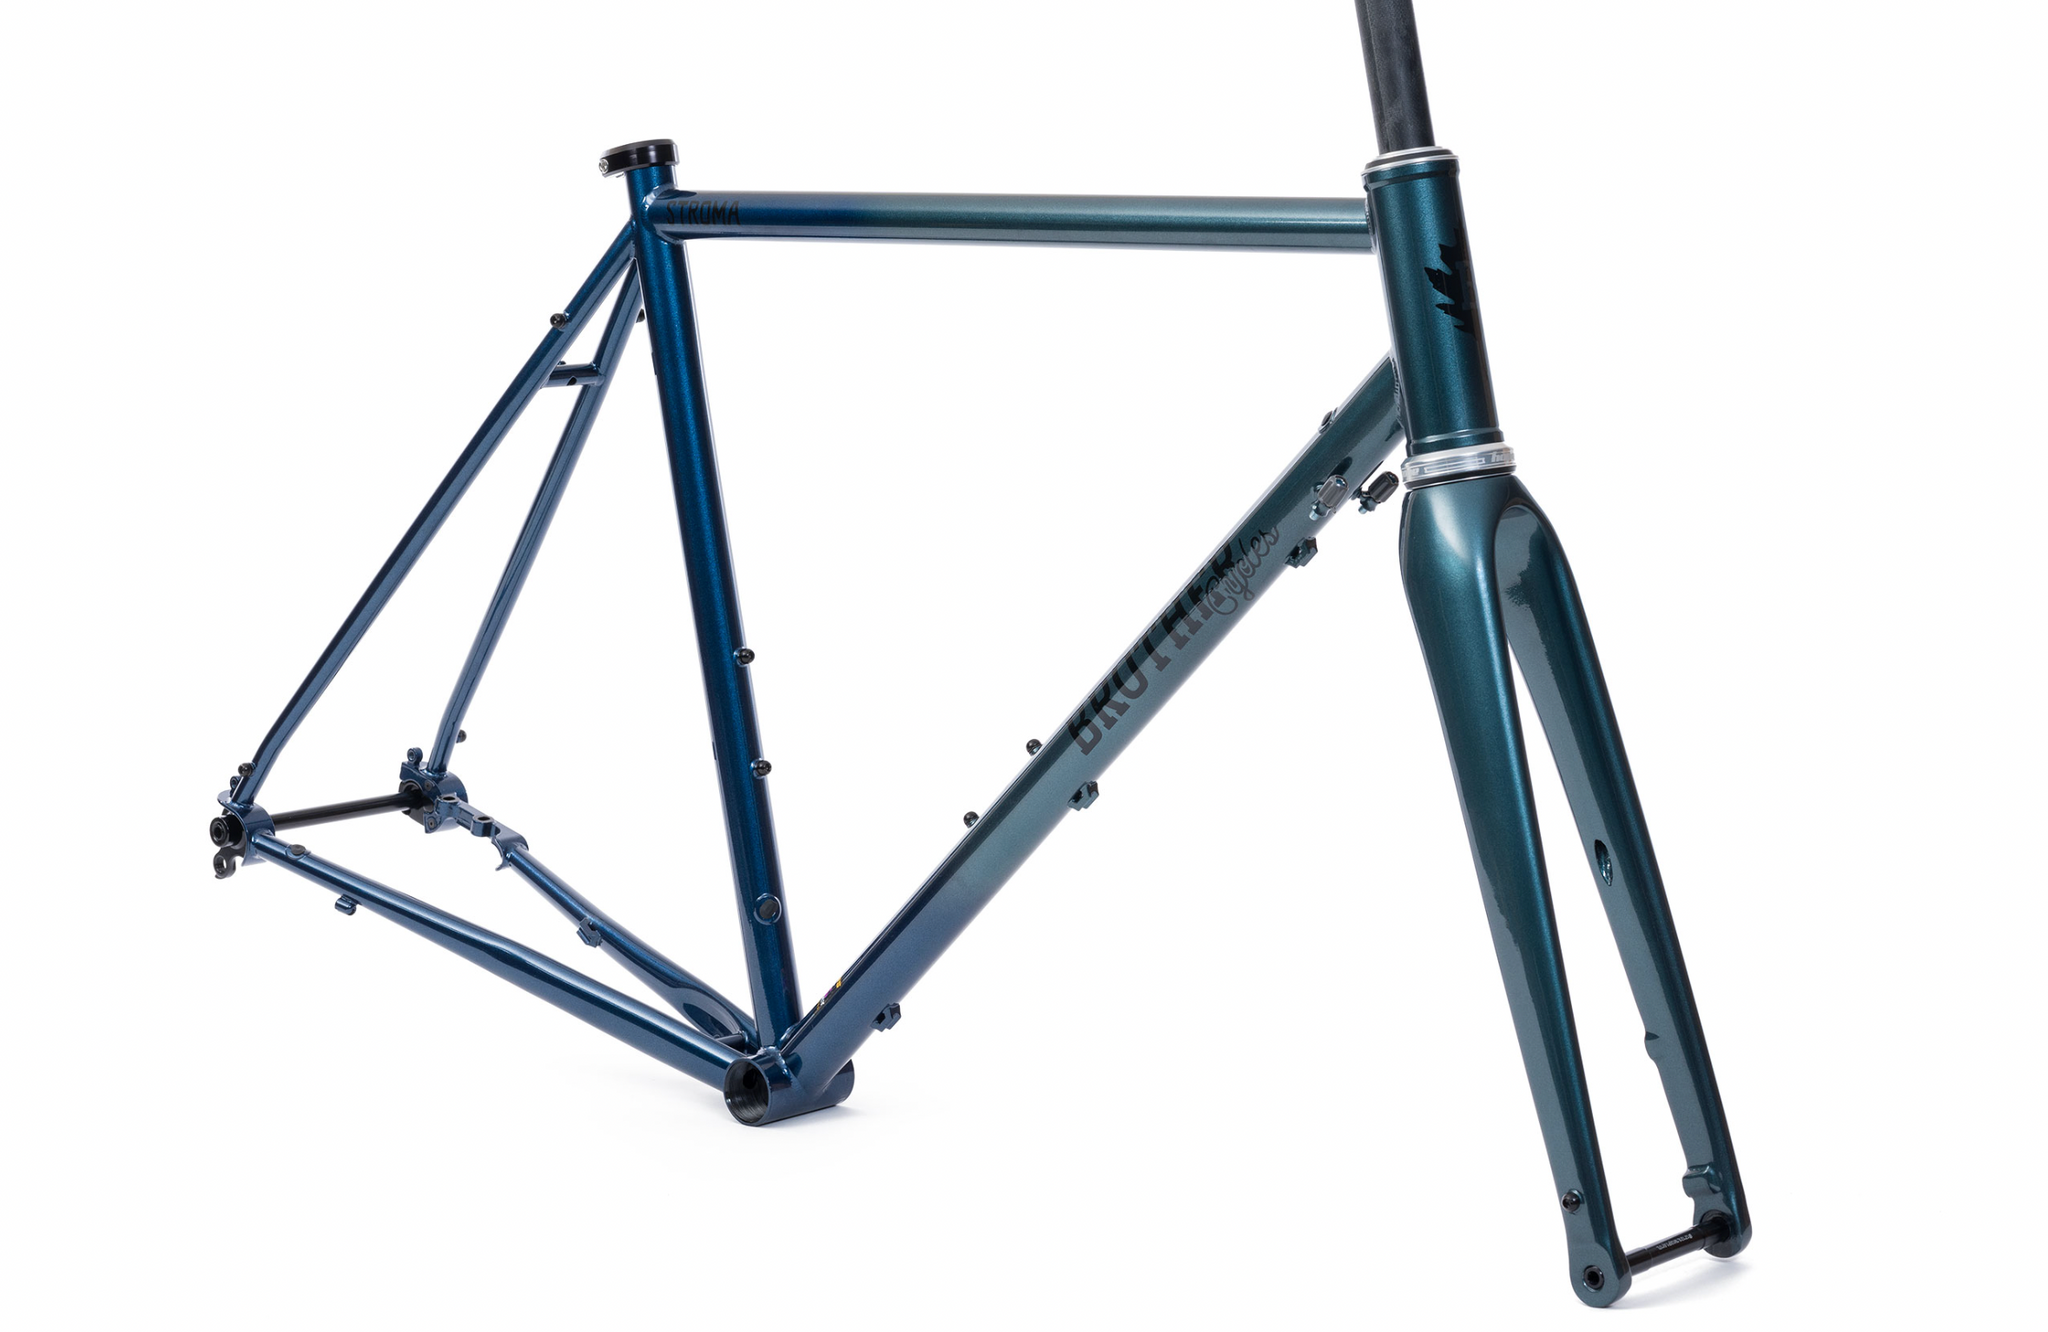 Brother Cycles Stroma Frameset